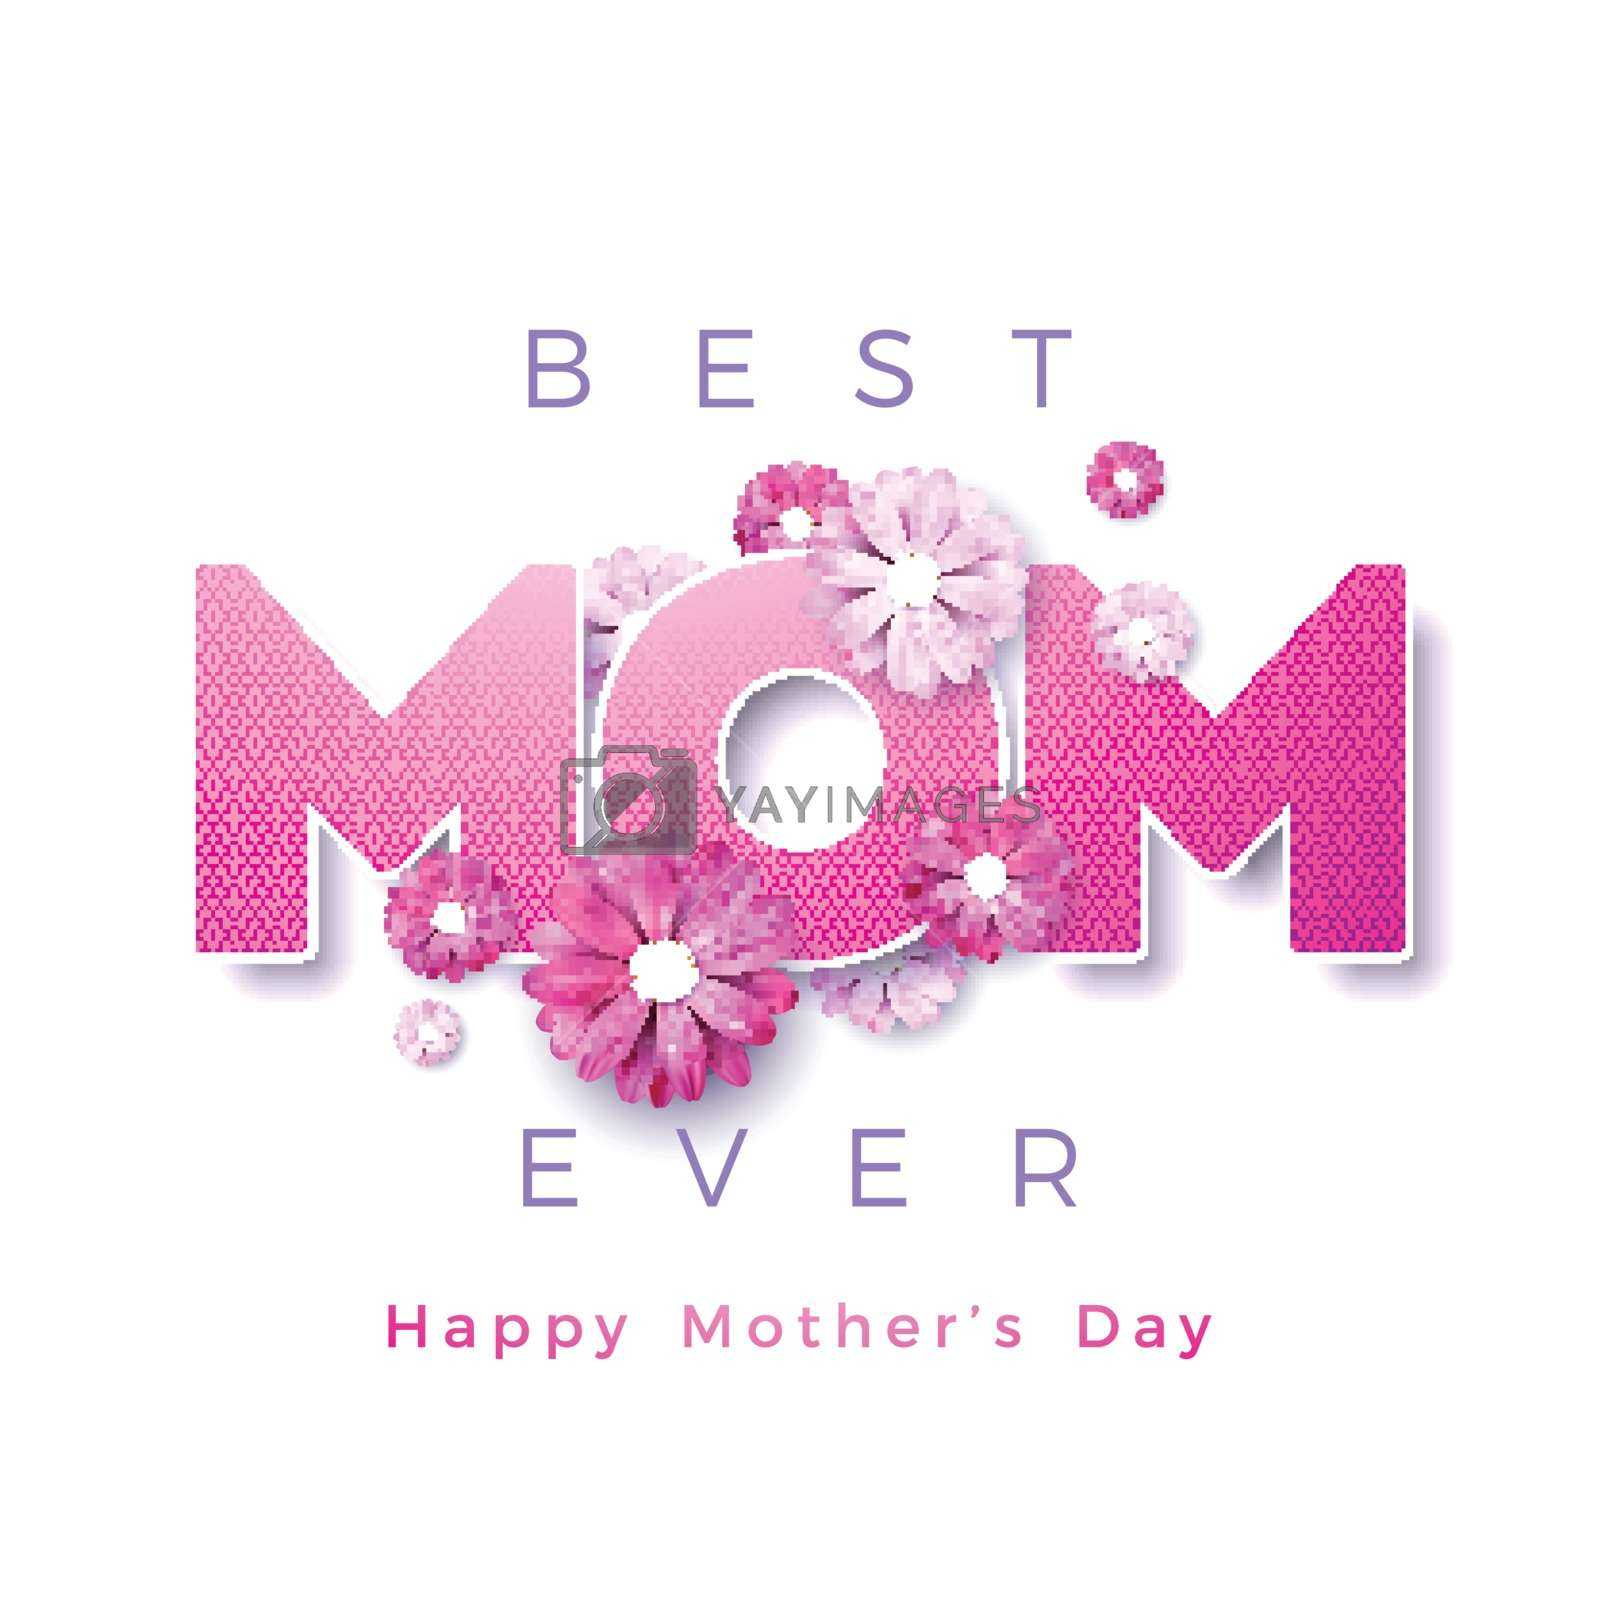 Happy Mothers Day Greeting Card Design With Flower And Best Regarding Mom Birthday Card Template